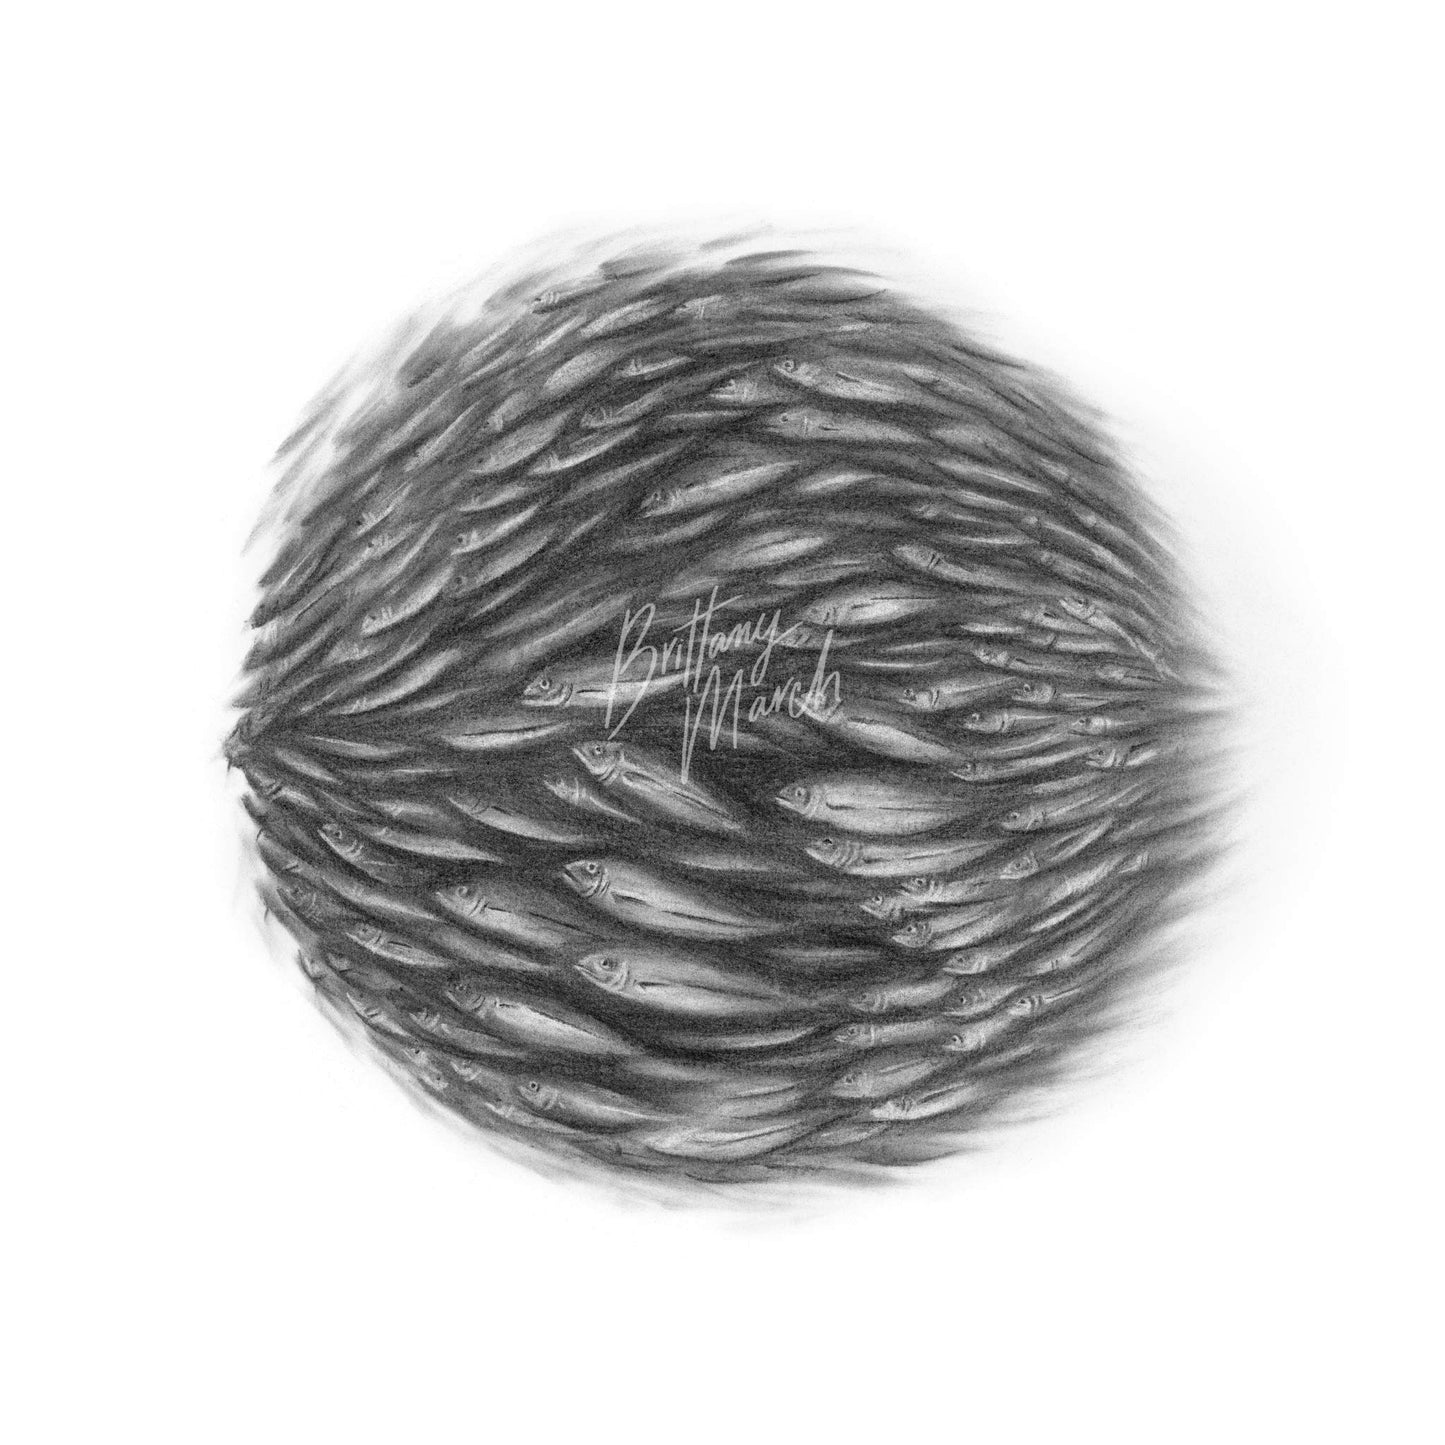 A black and white charcoal drawing of a bait ball school of fish in a sphere shape